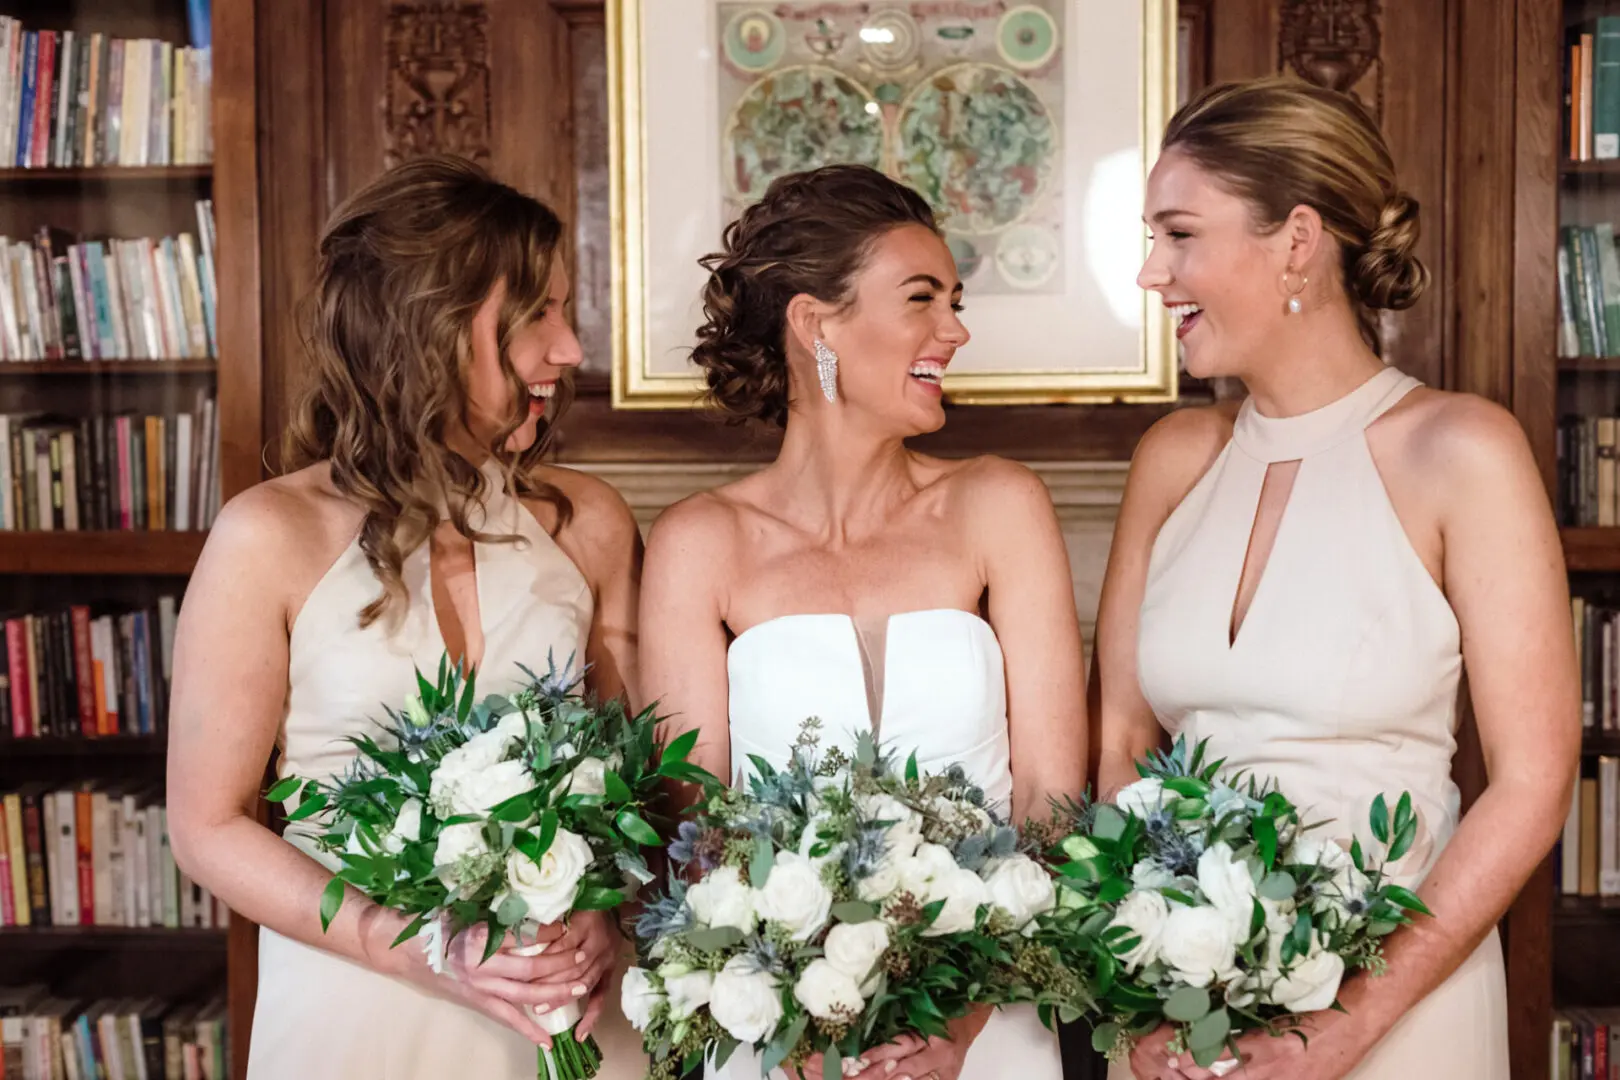 The bride enjoys a conversation with her maids of honor